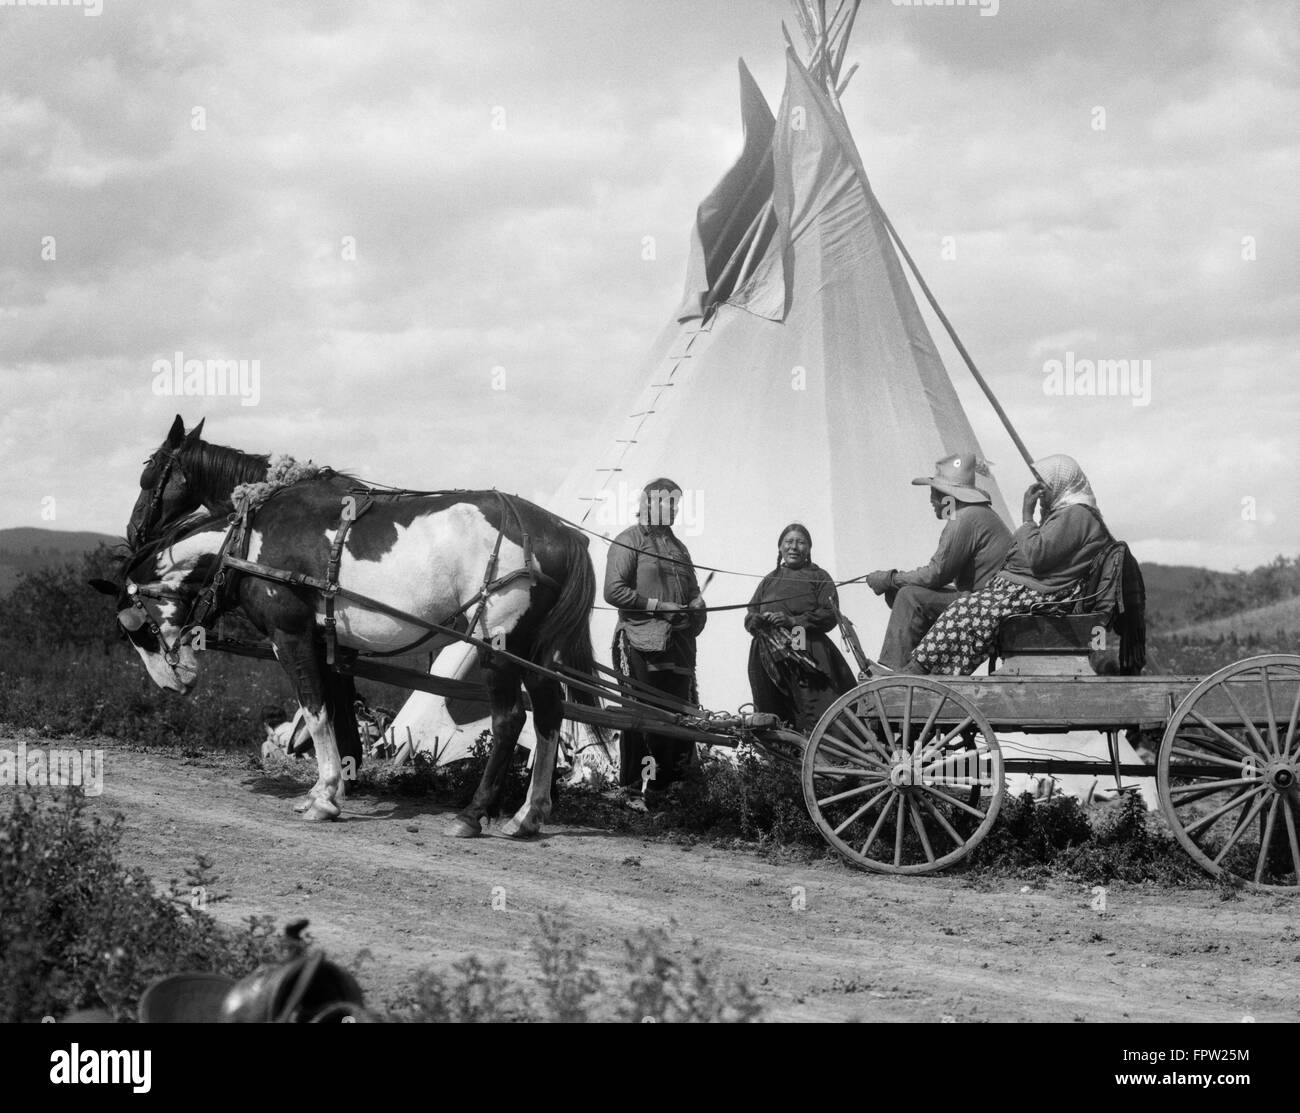 1920s TWO NATIVE AMERICAN INDIAN COUPLES VISITING BY TEPEE ONE COUPLE IN HORSE AND WAGON STONEY SIOUX TRIBE ABLERTA CANADA Stock Photo